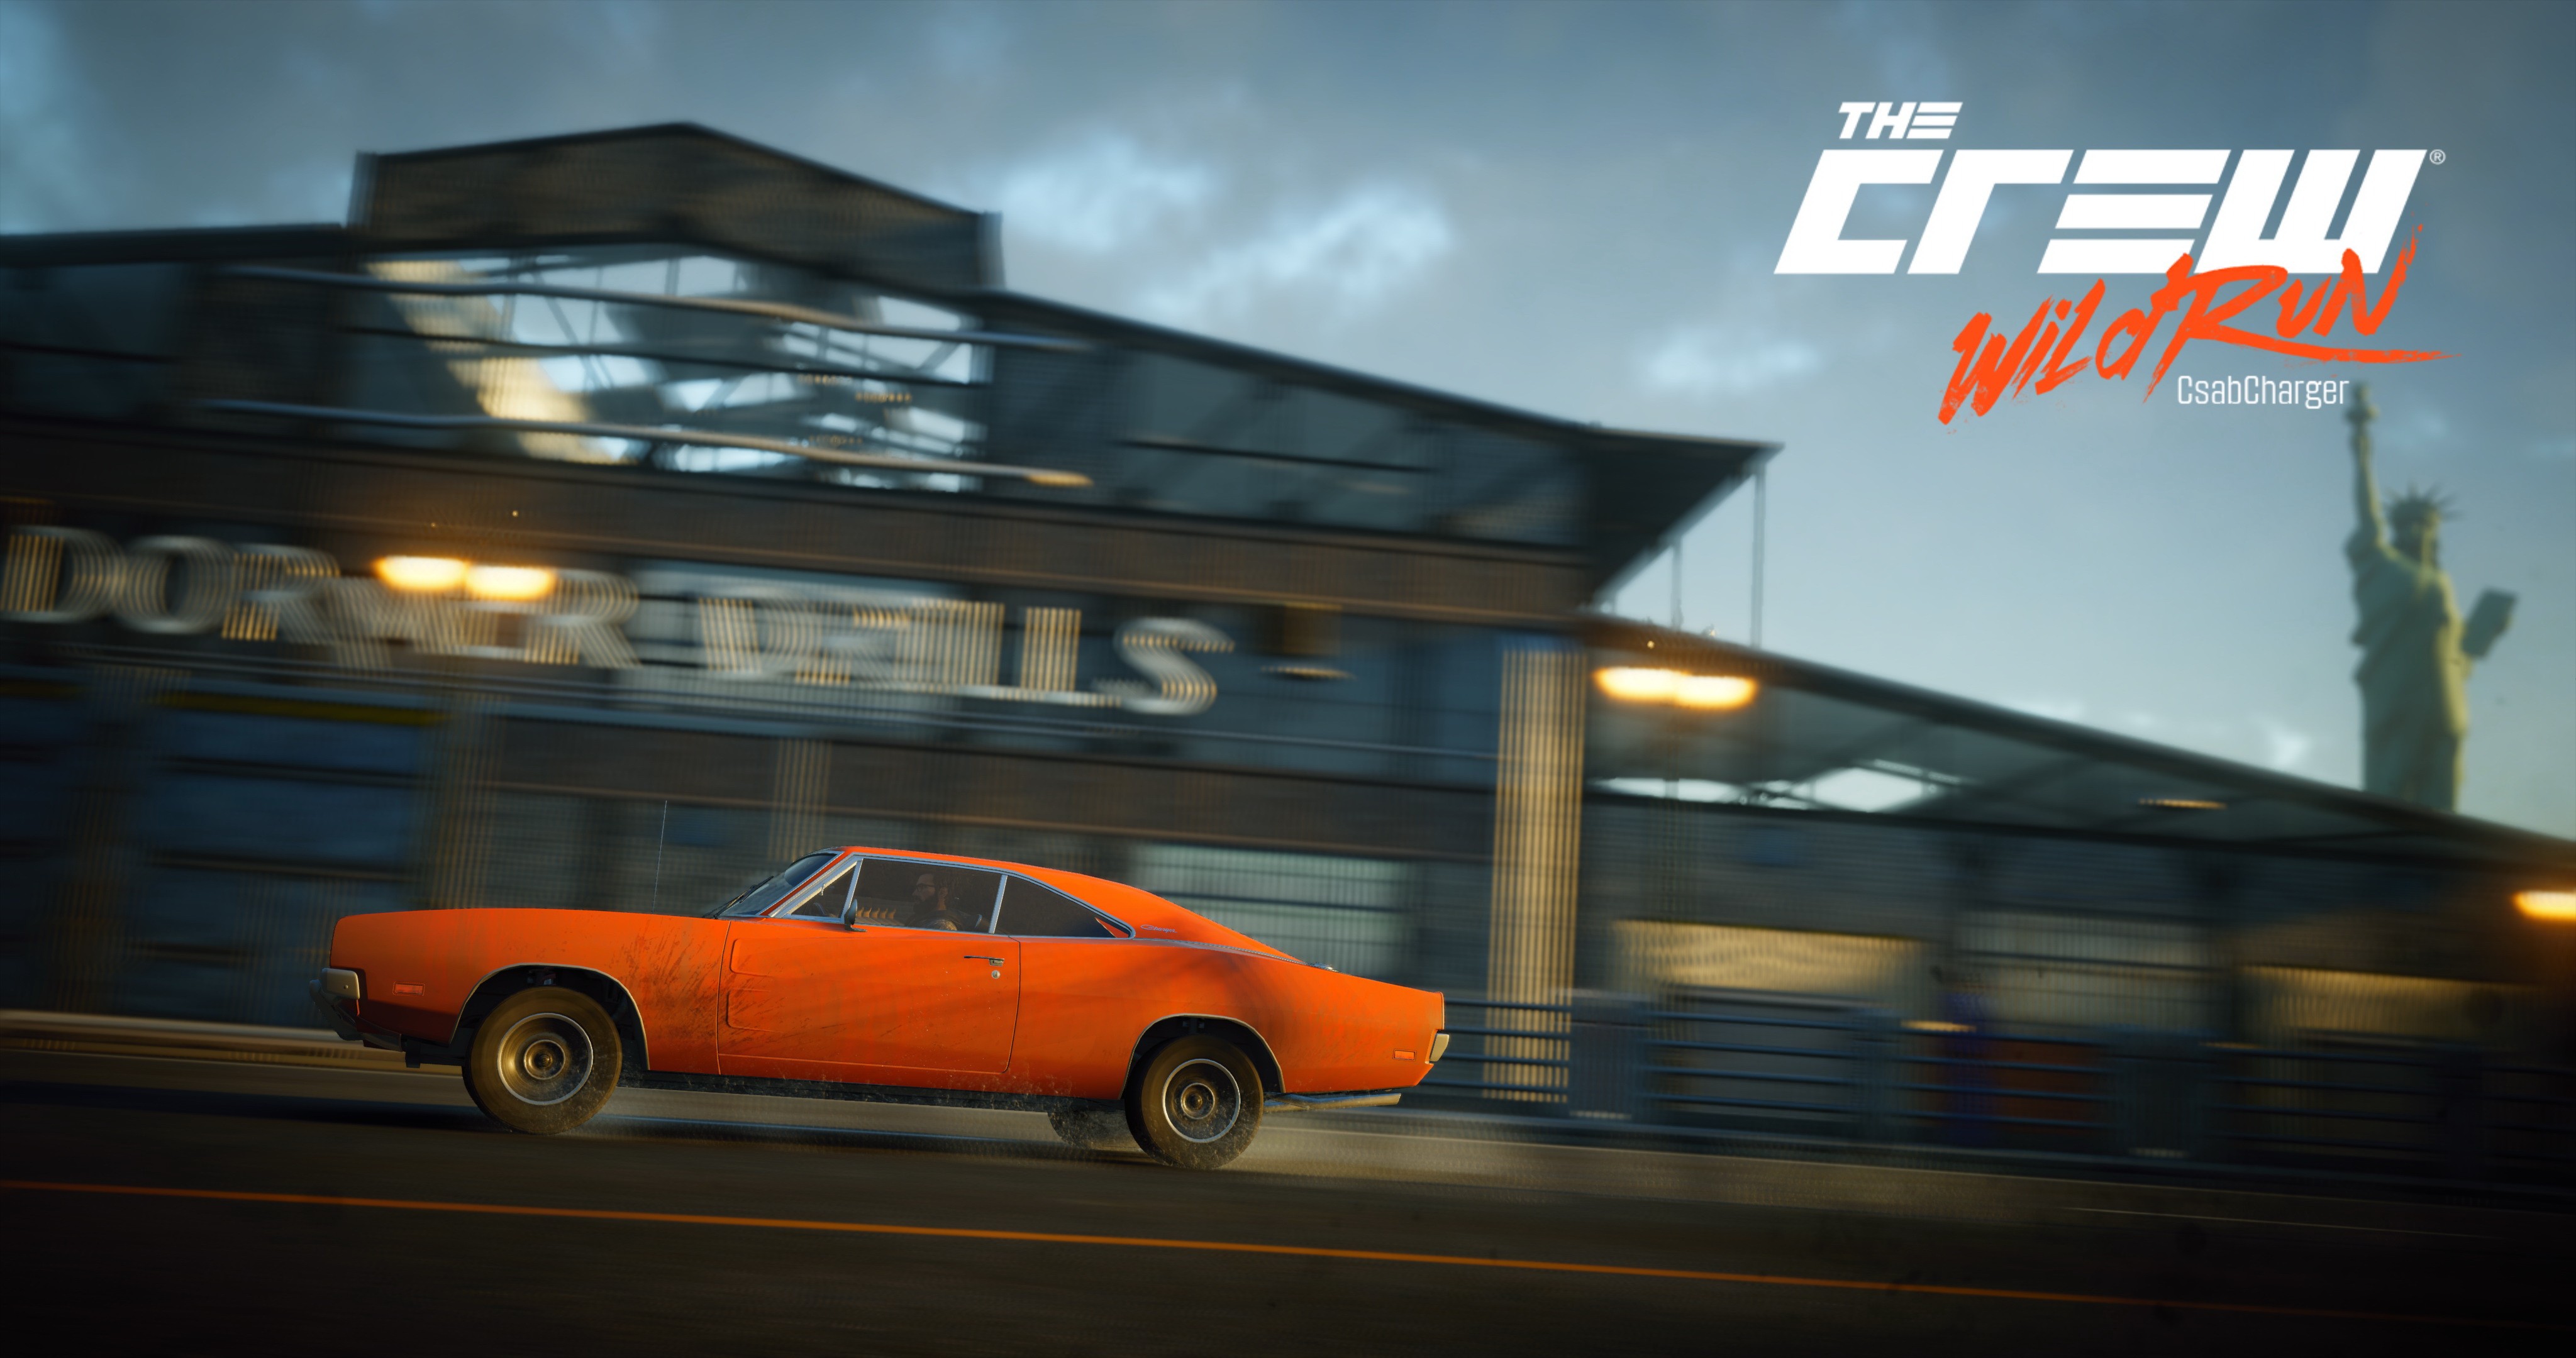 race cars, The Crew, The Crew Wild Run, Sunset, Dodge Charger R T 1968 Wallpaper